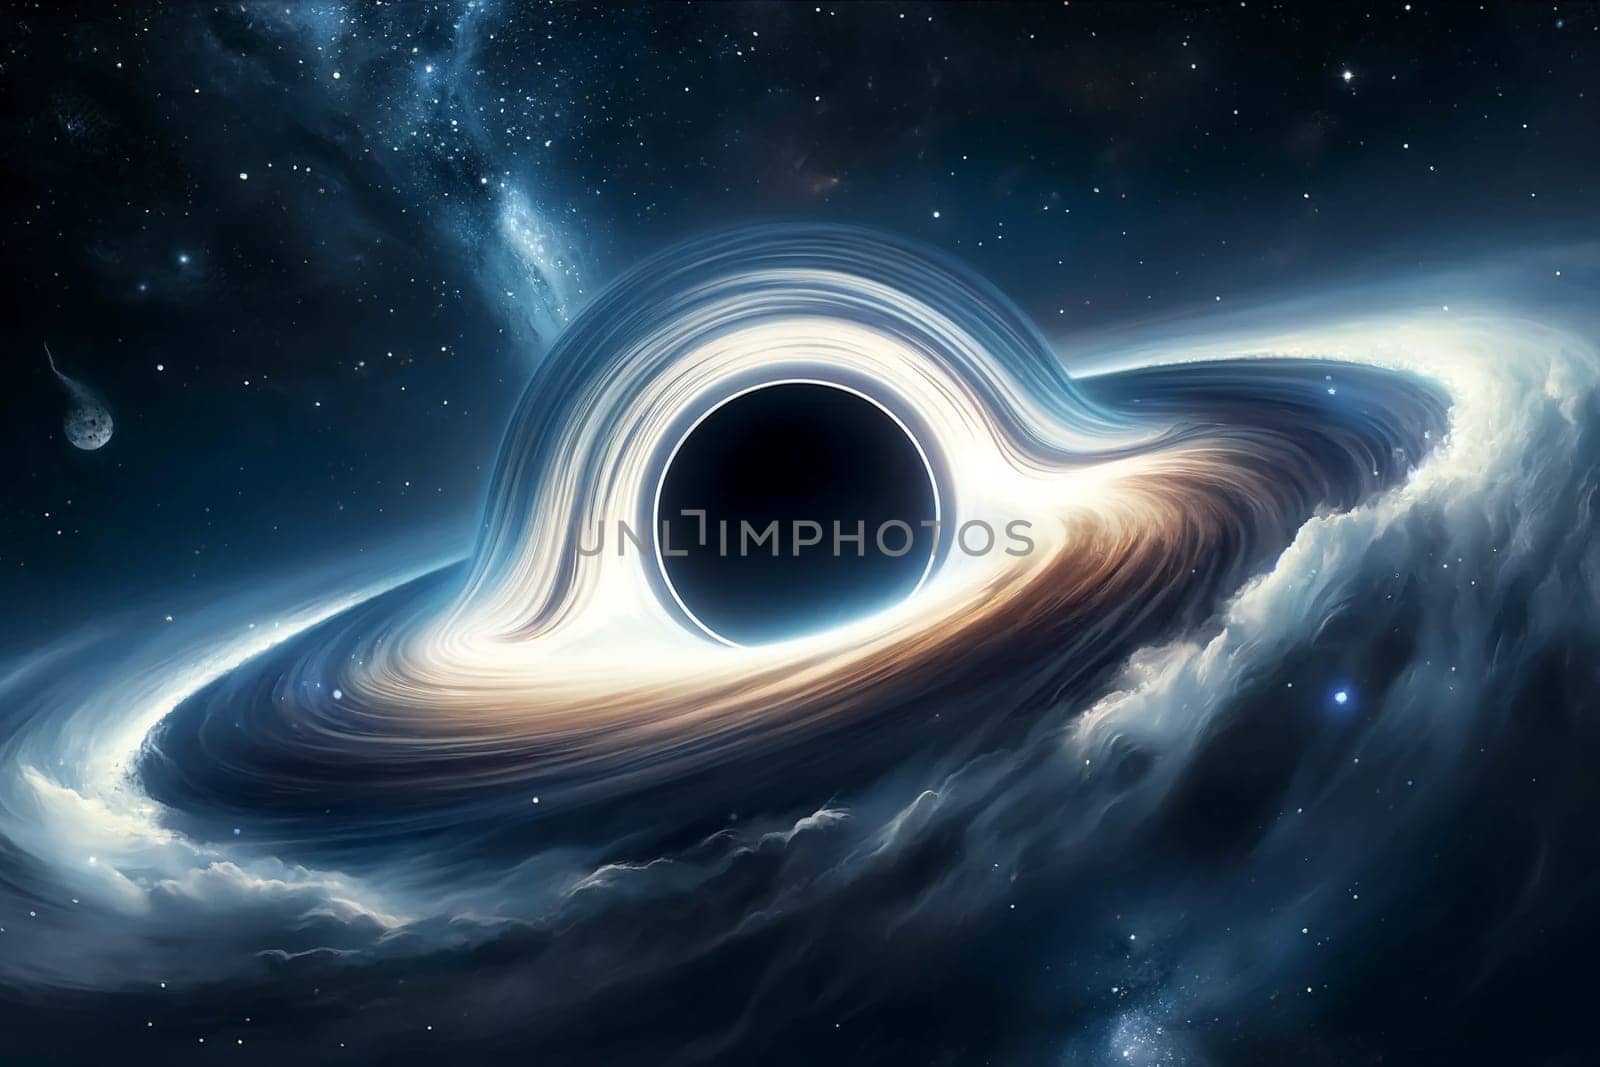 black hole with accretion disk in outer space illustration by Annado